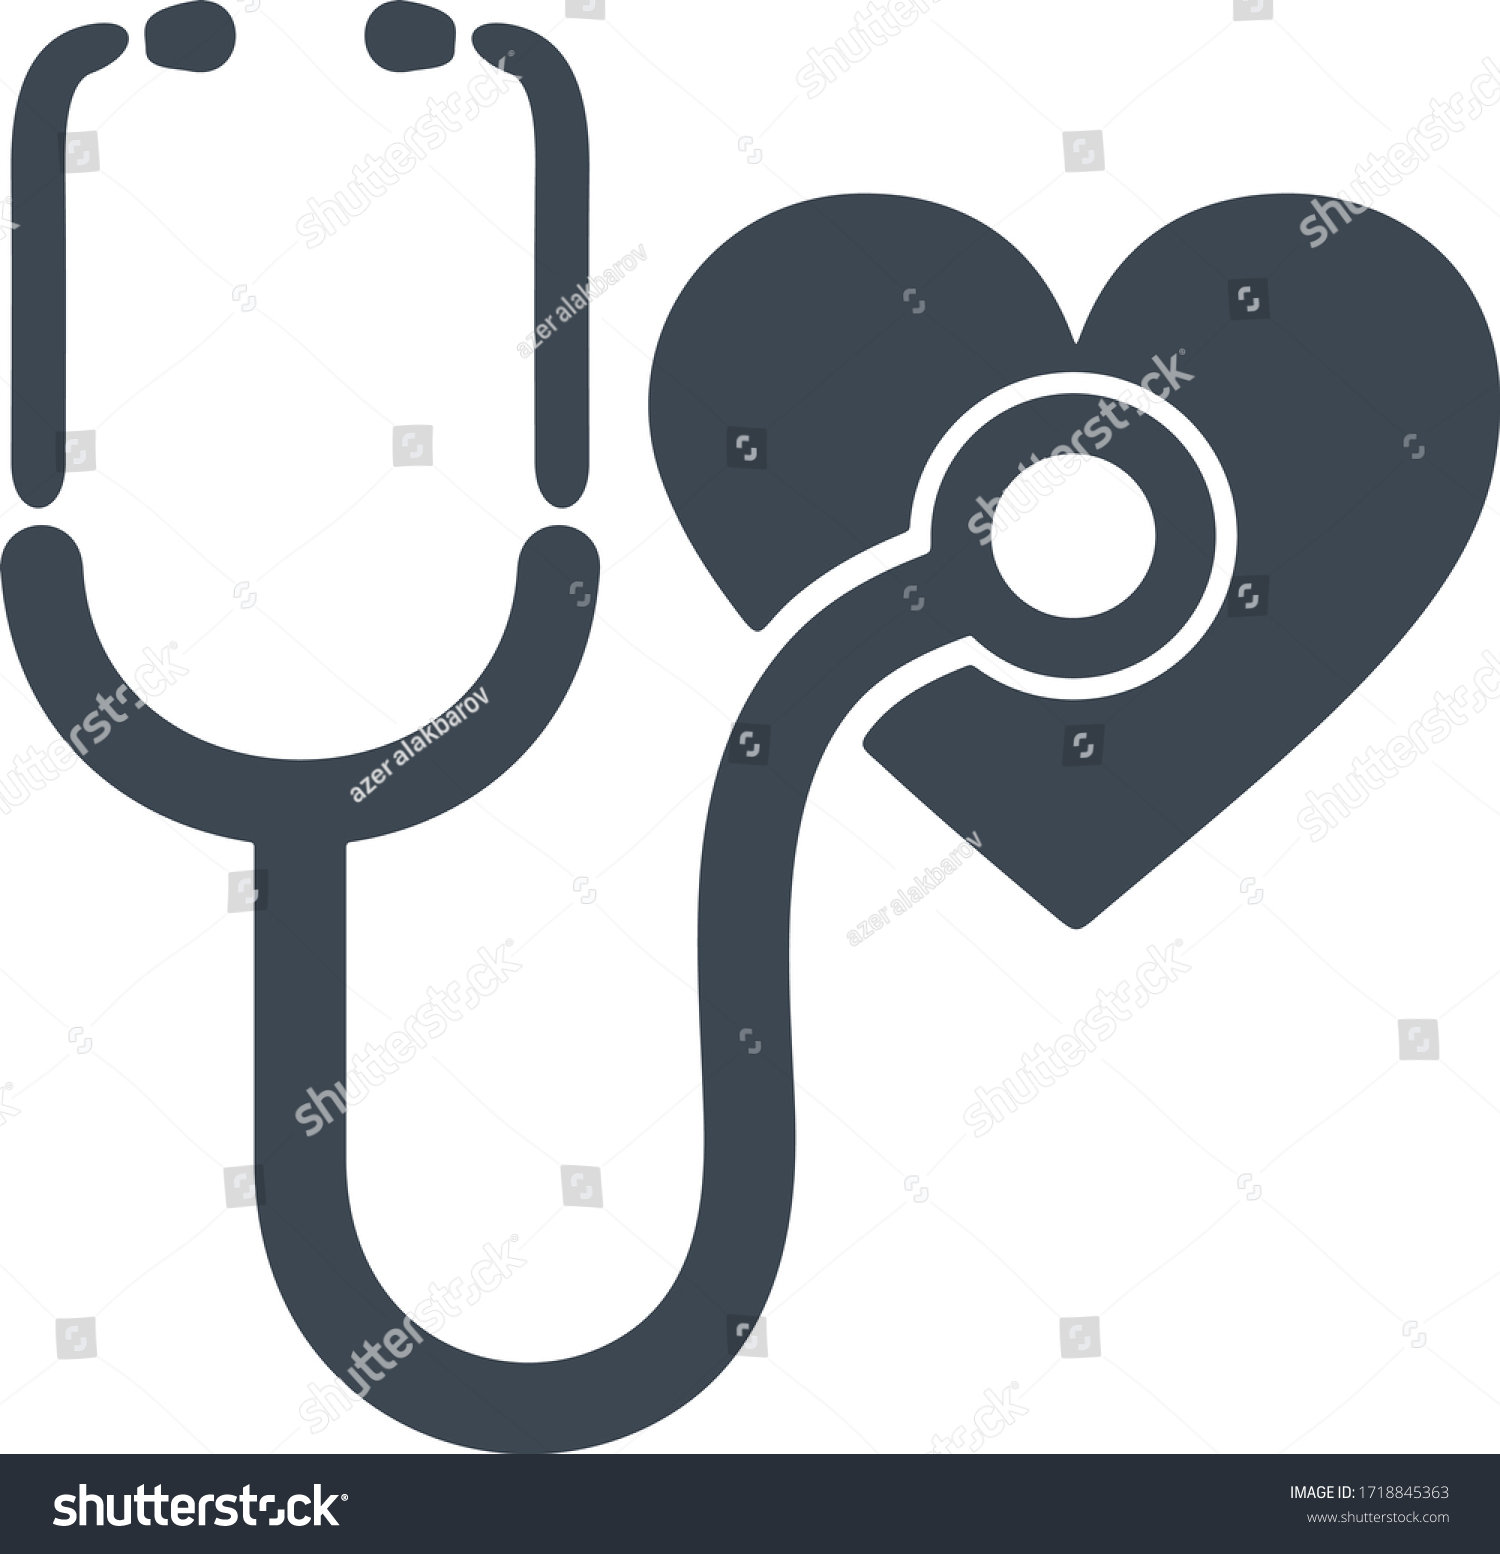 SVG of Stethoscope and heart symbol. Listening heartbeat. Heart rate measurement. Flat icon design for health concept. svg